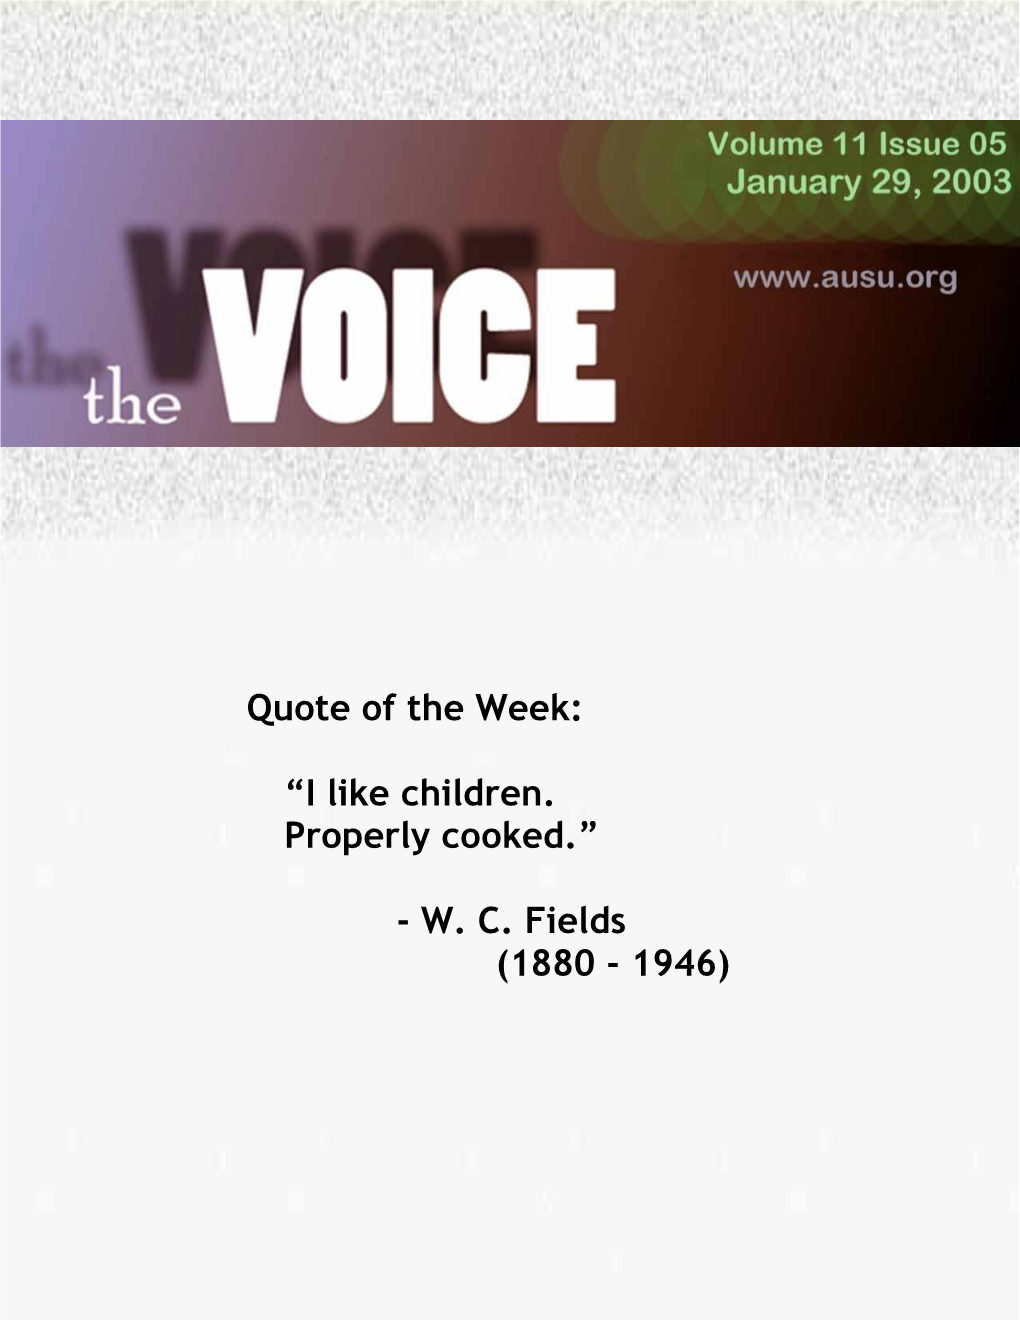 The Voice Volume 11, Issue 04